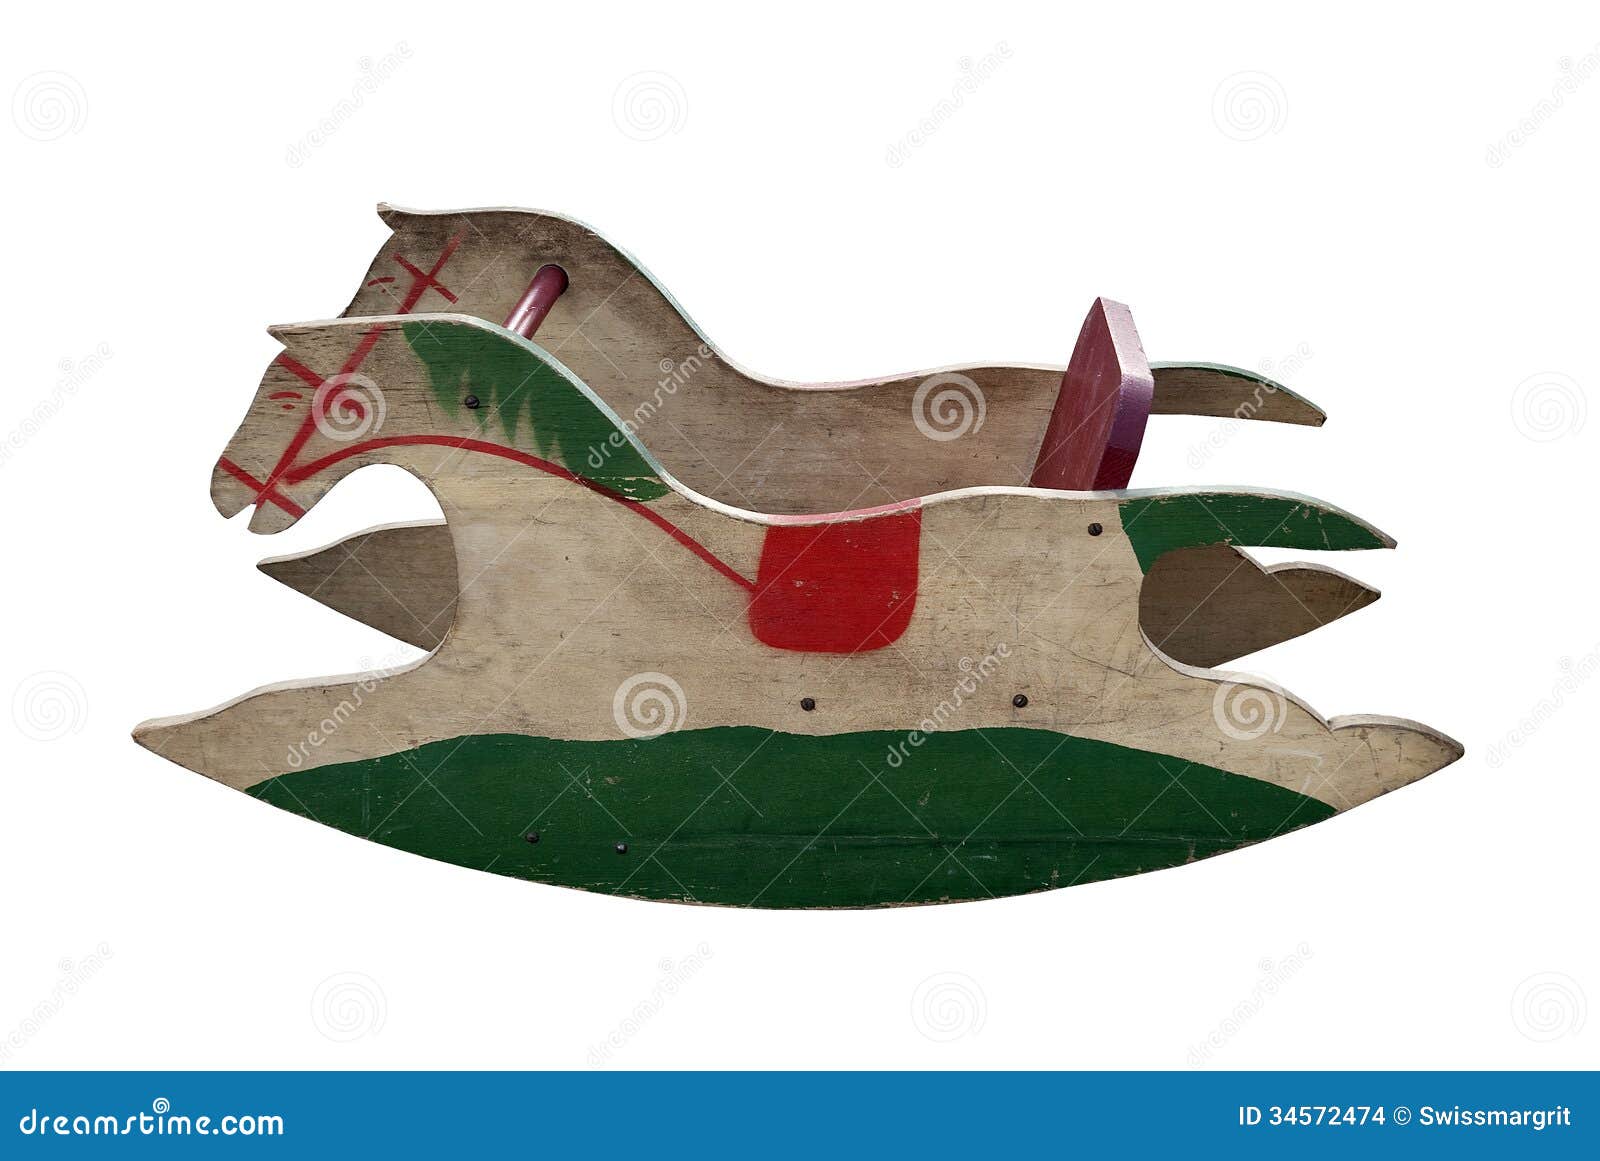 Old Wooden Rocking Horse Stock Images - Image: 34572474